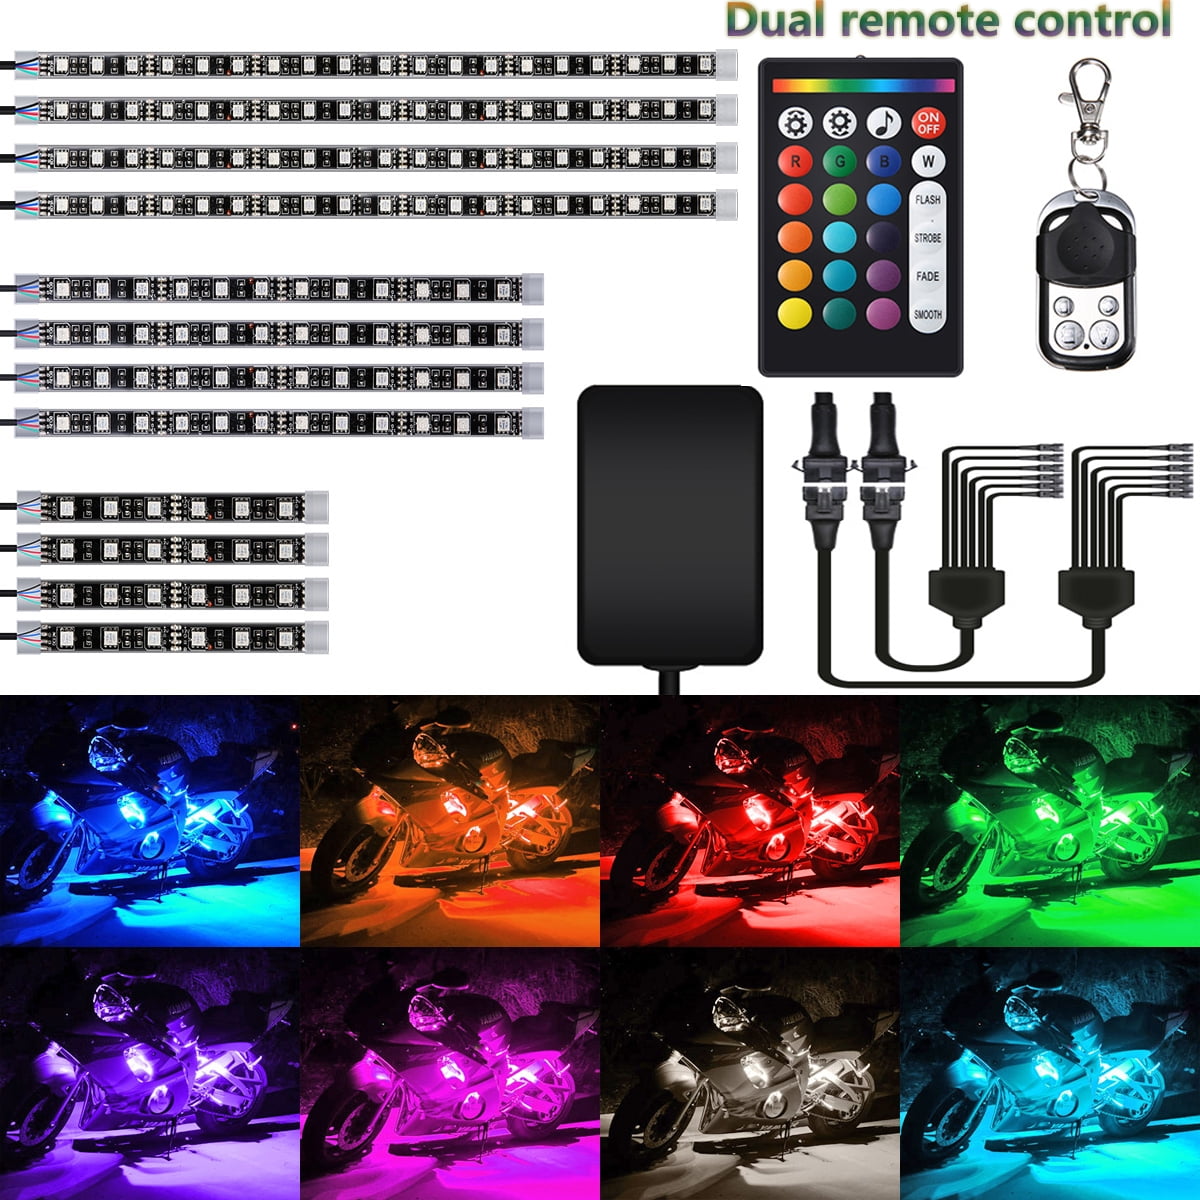 ANFTOP 10pcs Motorcycle LED Light Kit Strip Waterproof Multi-Color Wireless Remote Control Atmosphere Lamp RGB Flexible Strip Accent Glow Neon Lights Ground Effect Light for Motorcycle 